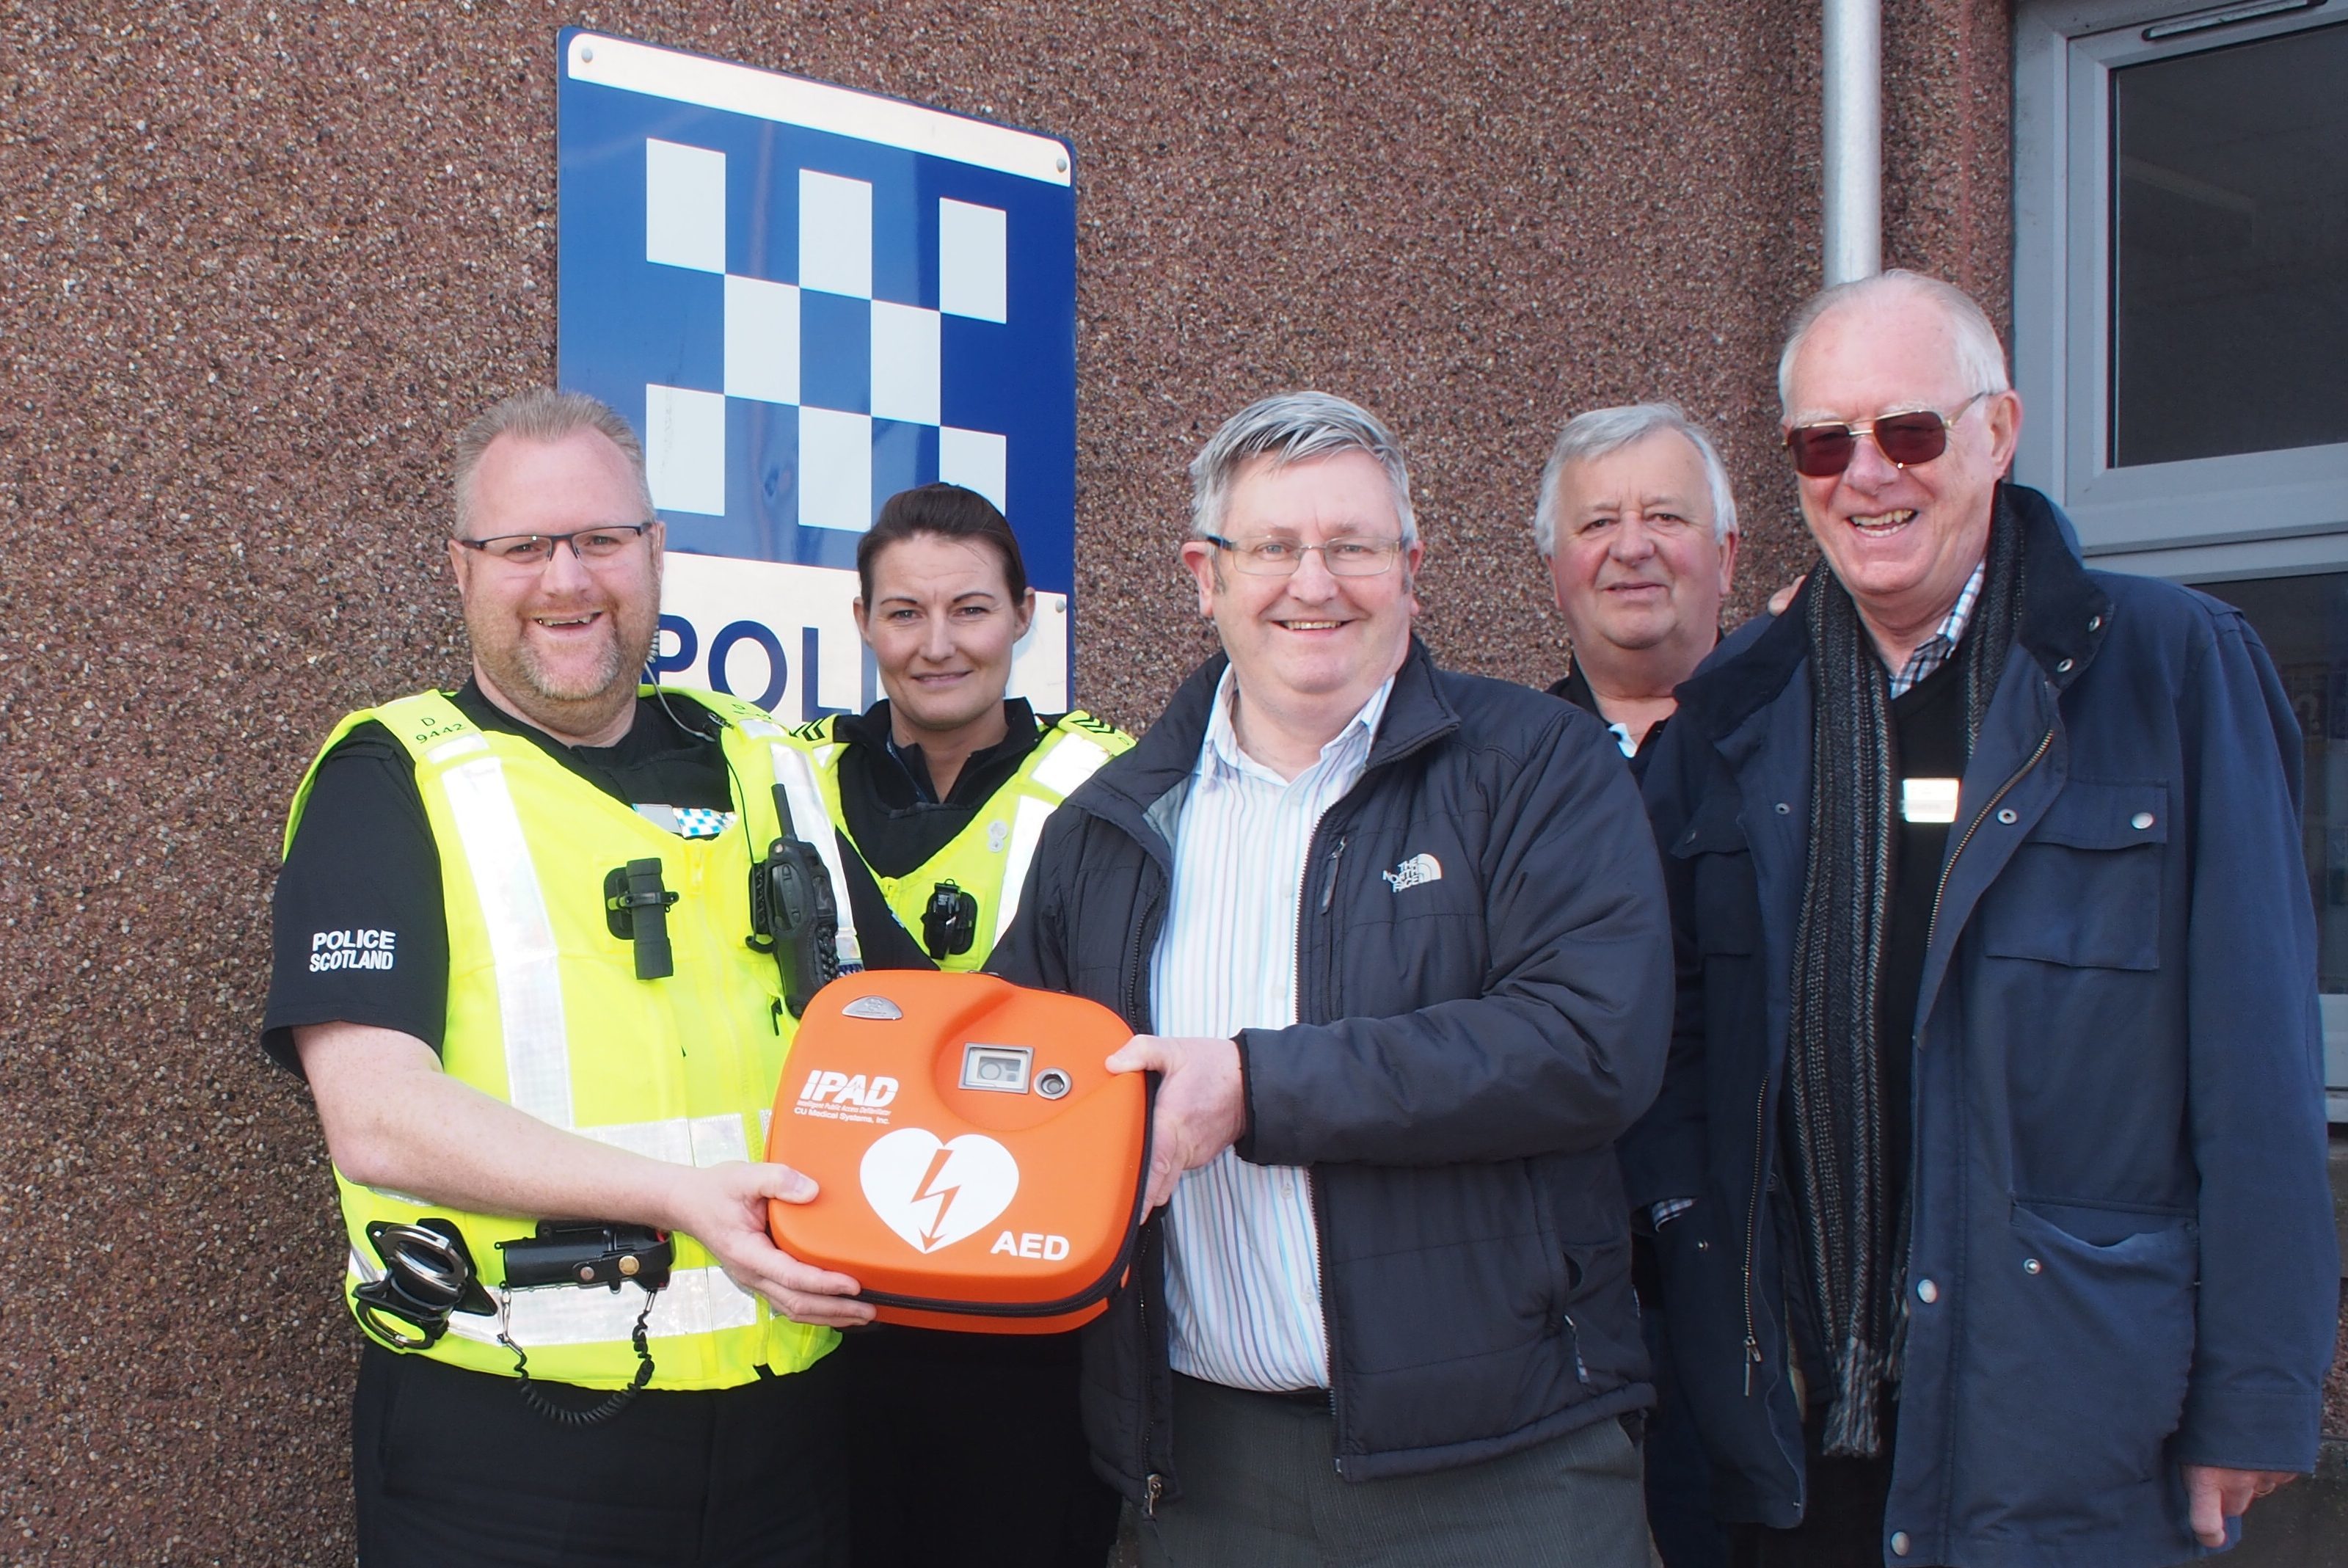 The latest Arbroath defibrillator was installed outside the police station in Gravesend